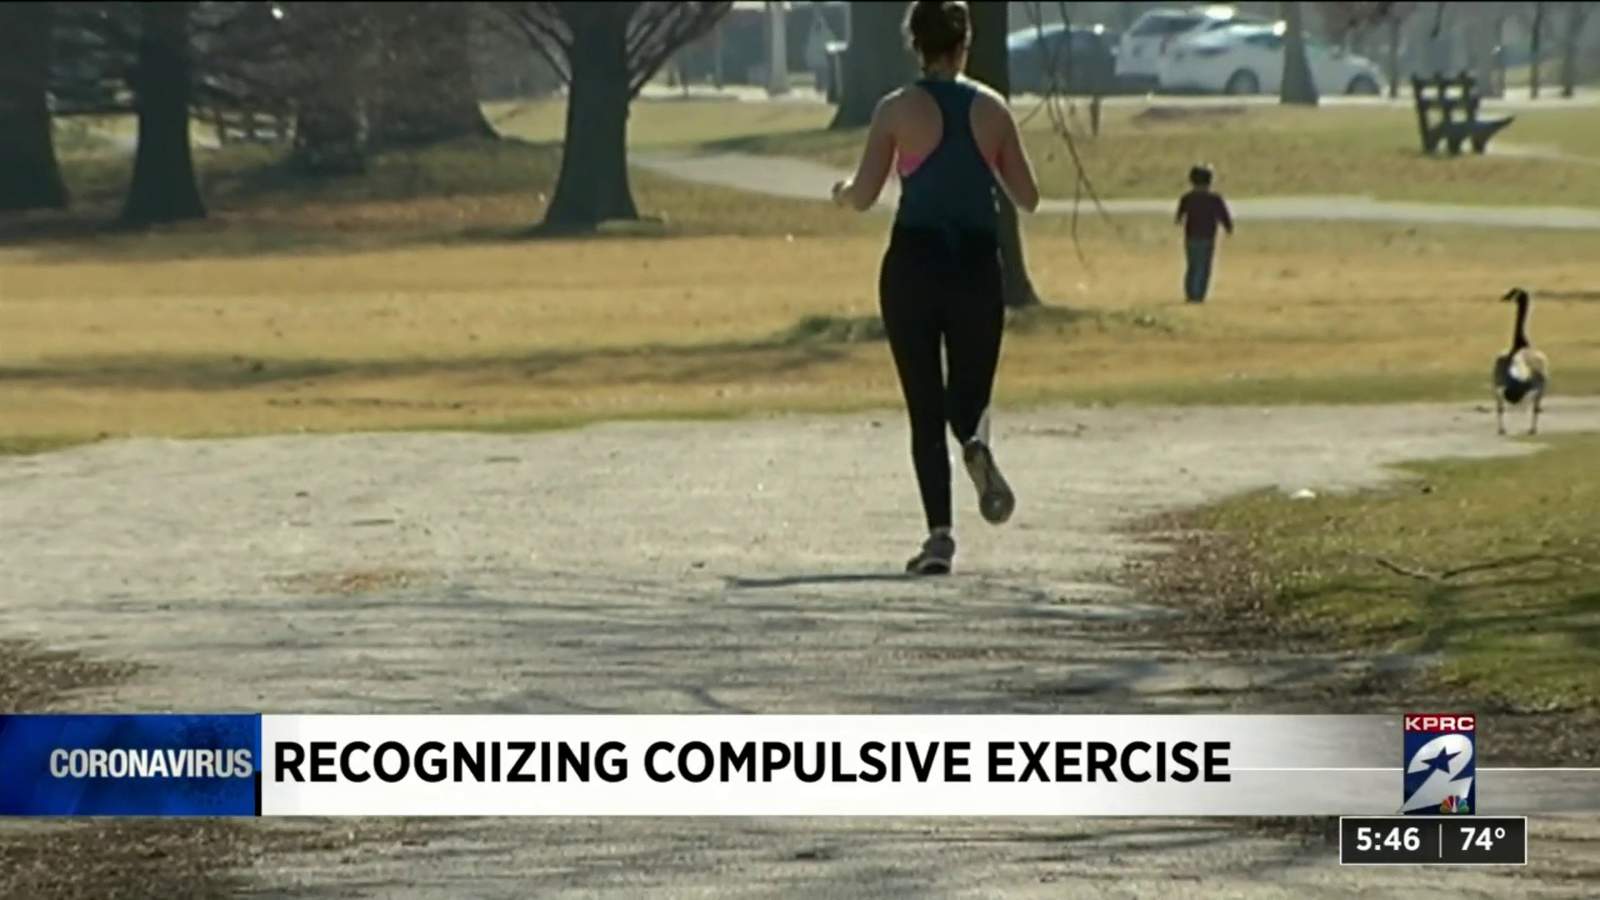 Eating disorders and compulsive exercise on the rise during pandemic